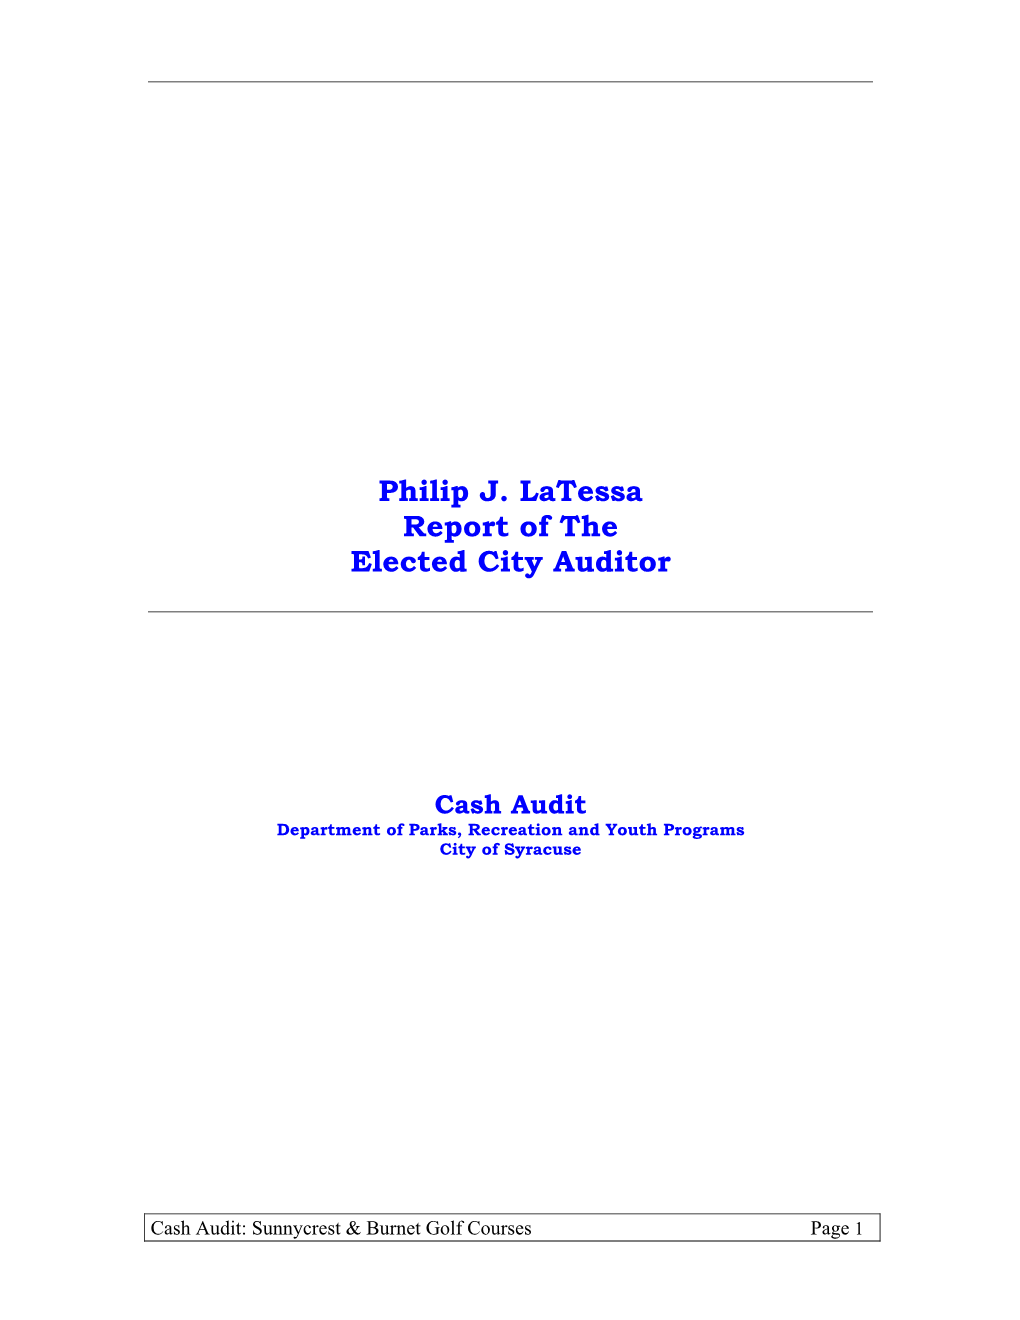 Philip J. Latessa Report of the Elected City Auditor Cash Audit